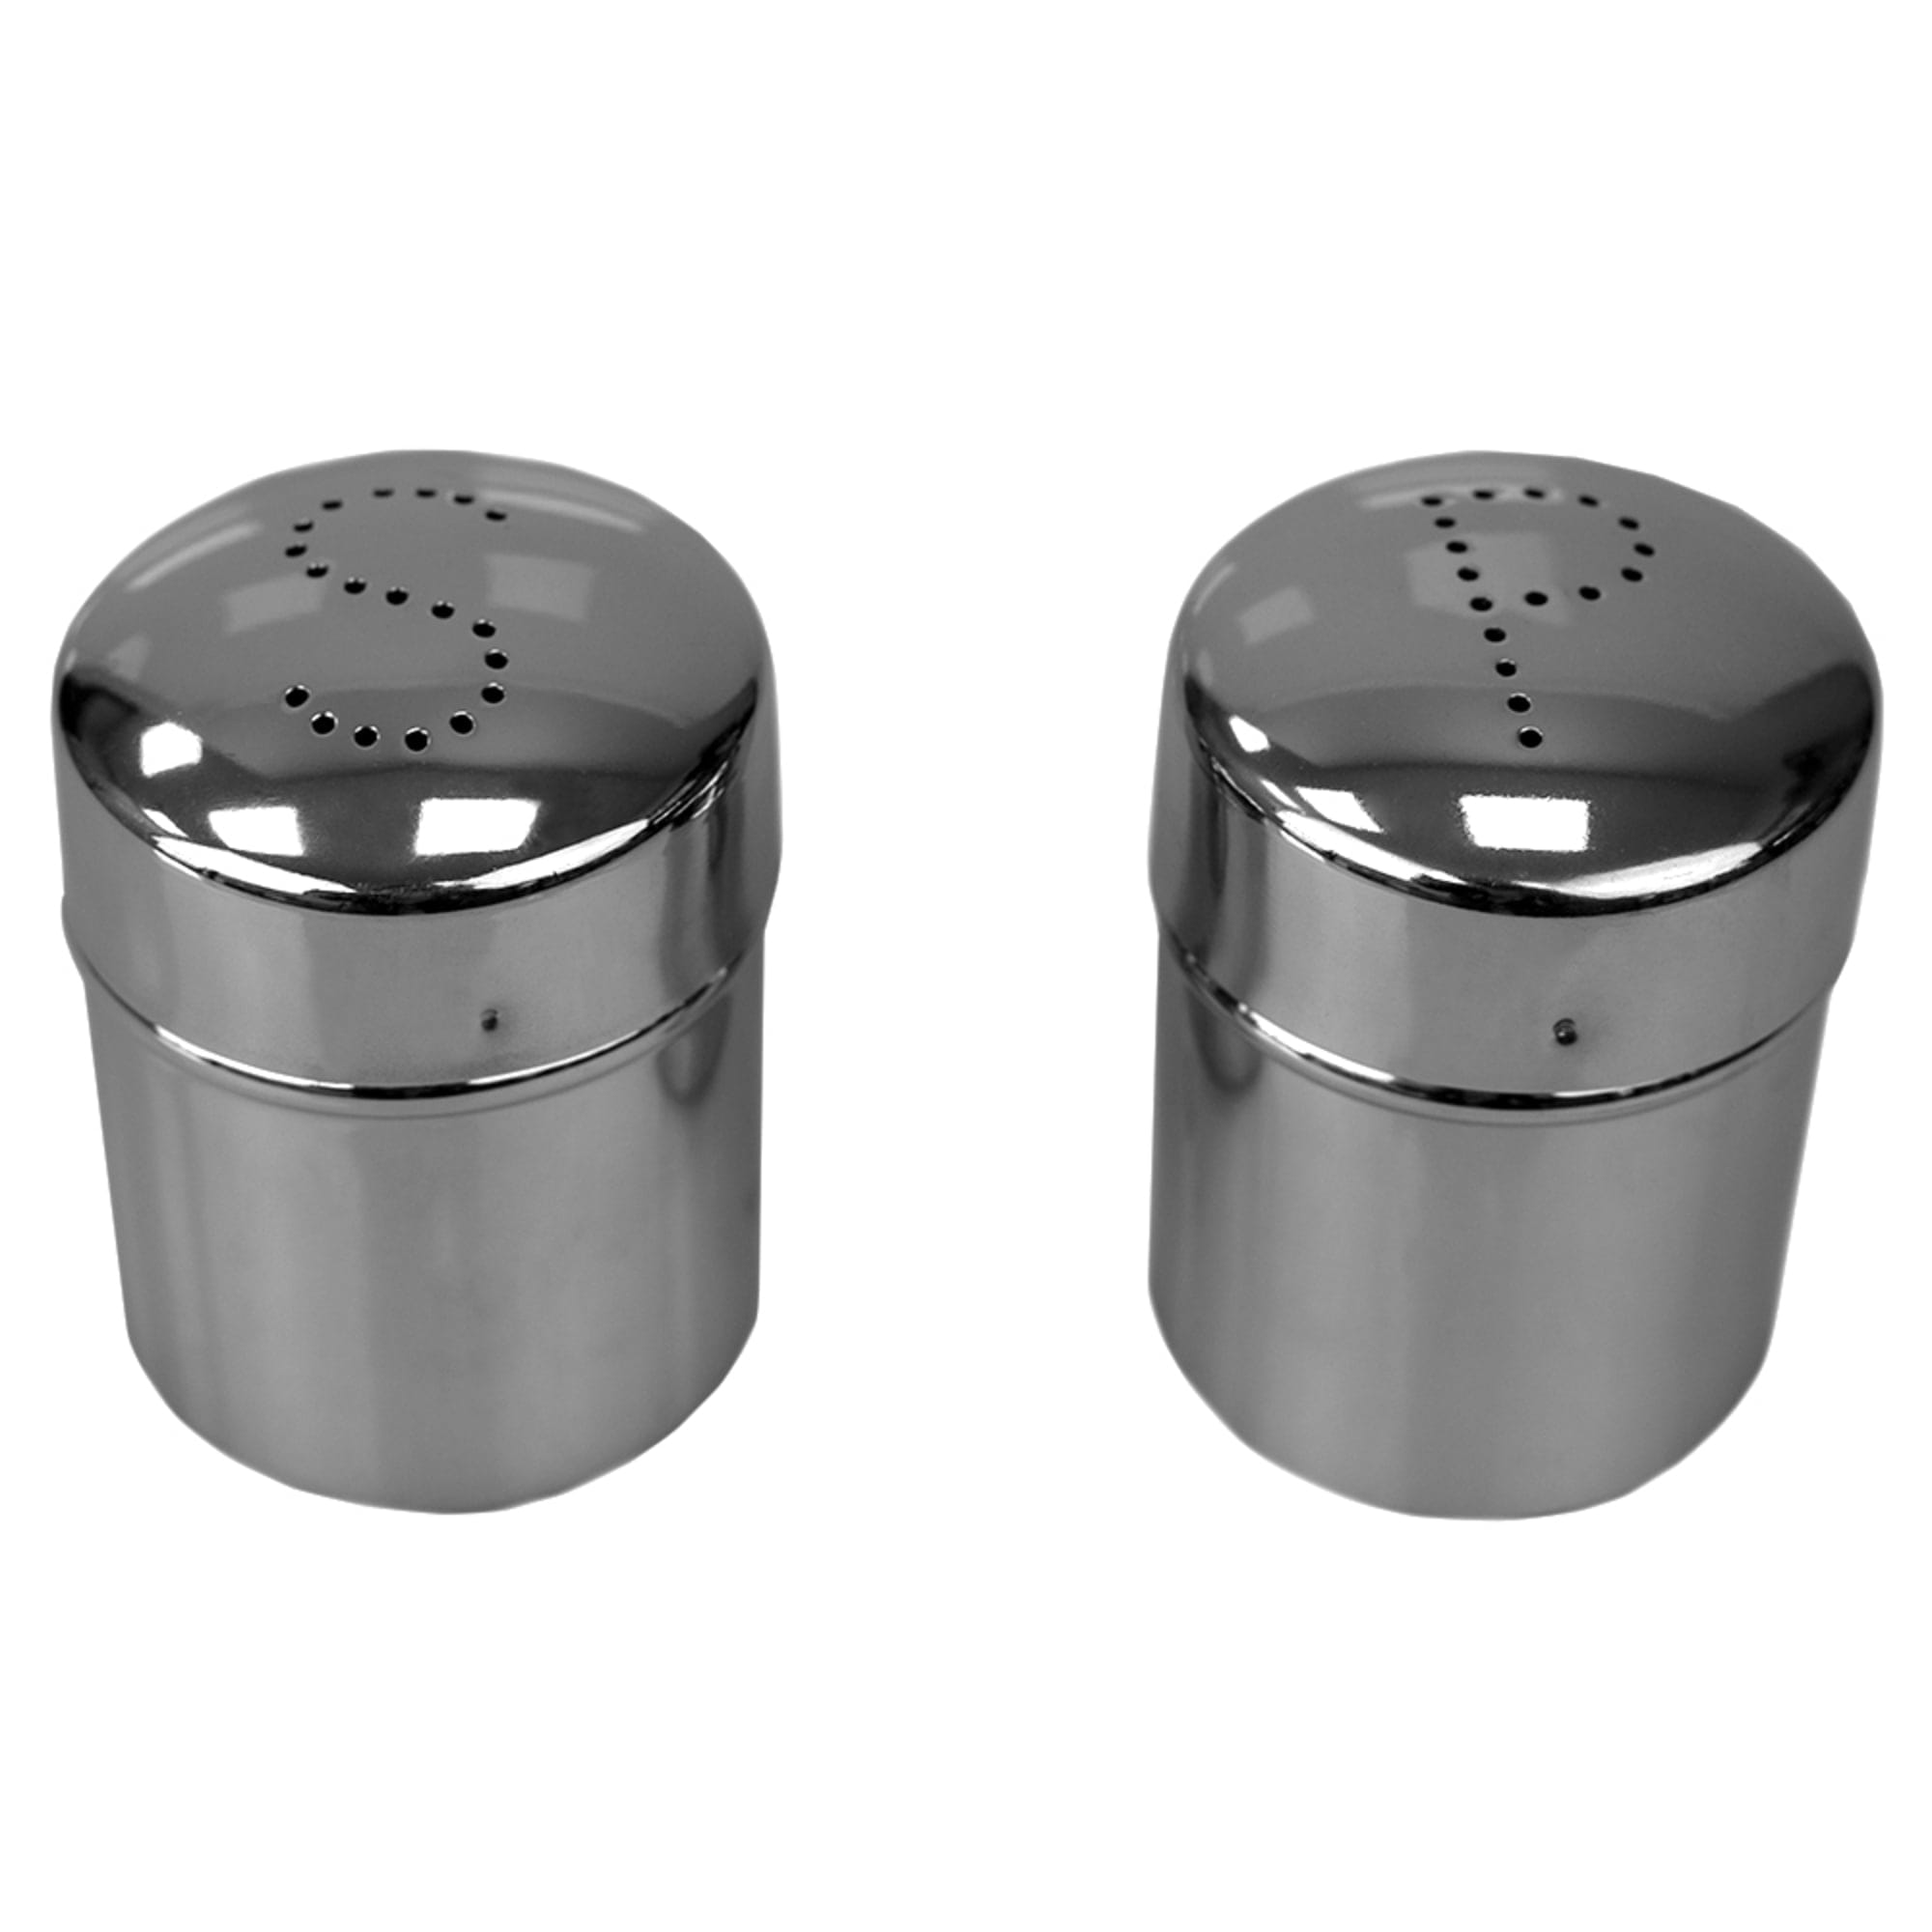 Home Basics 5 oz. Stainless Steel Salt and Pepper Set with Perforated Labeled Sifter Top, (Set of 2), Silver $3 EACH, CASE PACK OF 24